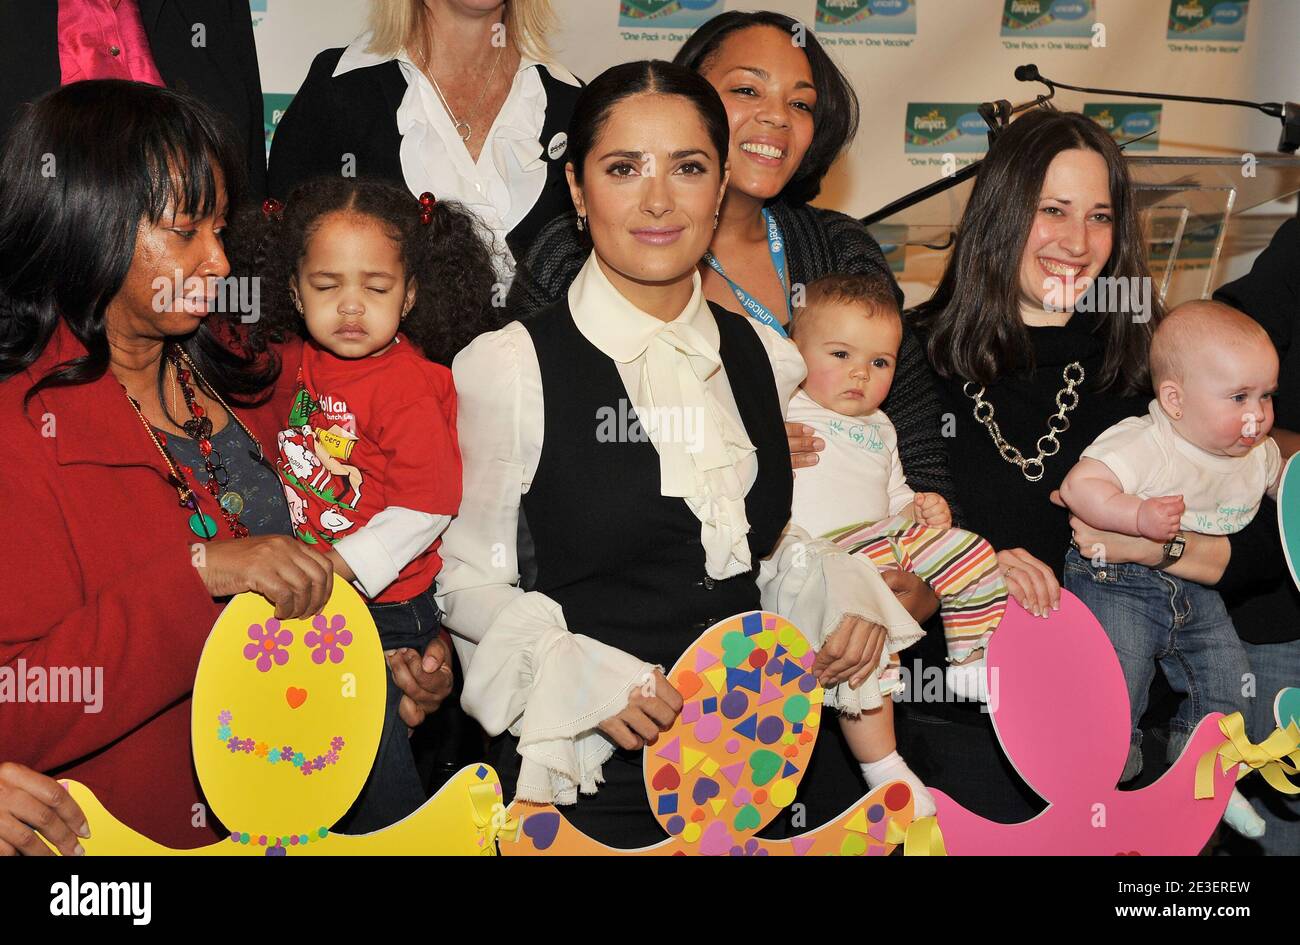 Actress Salma Hayek launches the 2nd year of the 'One Pack = One Vaccine' campaign, a partnership between Pampers & UNICEF that provides life-saving vaccines to help eliminate Maternal and Neonatal Tetanus, at US Fund for UNICEF in New York City, NY, USA on February 5, 2009. Through May 1, 2009, for every specially marked pack of Pampers product purchased in the USA and Canada, Pampers will provide UNICEF with funding for one life-saving tetanus vaccine. Photo by Slaven Vlasic/ABACA Stock Photo